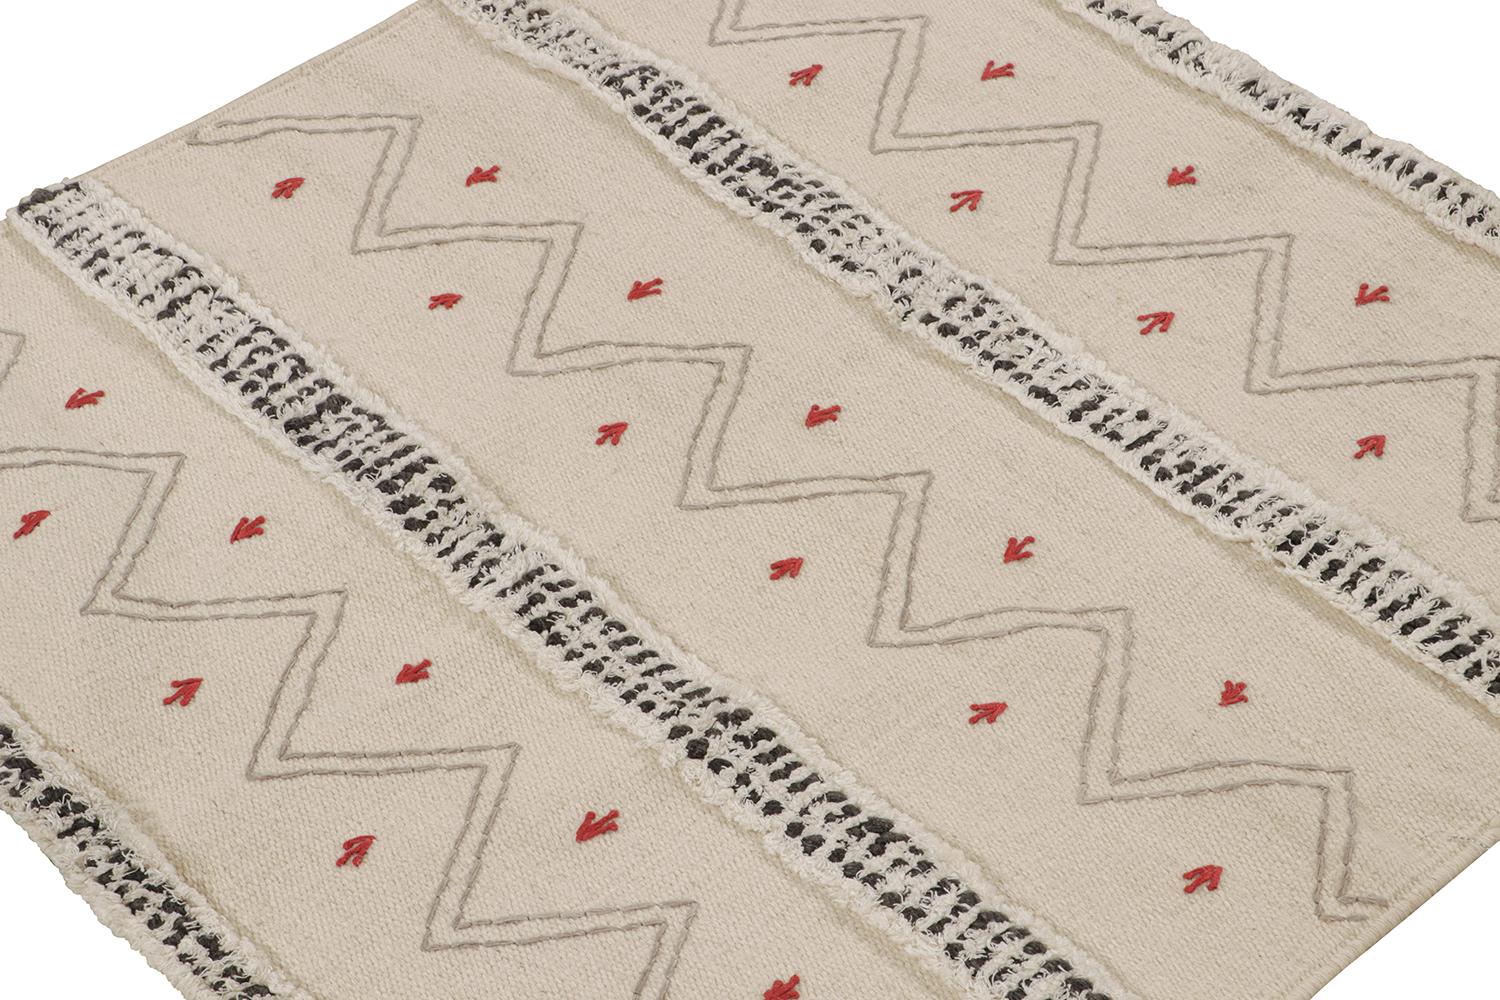 This 3x3 flatweave is a grand new entry to Rug & Kilim’s repertoire of contemporary kilims. Handwoven in wool.

On the Design: 

This piece is inspired by tribal flatweaves, and revels in off-white with gray, red and black accents. Keen eyes